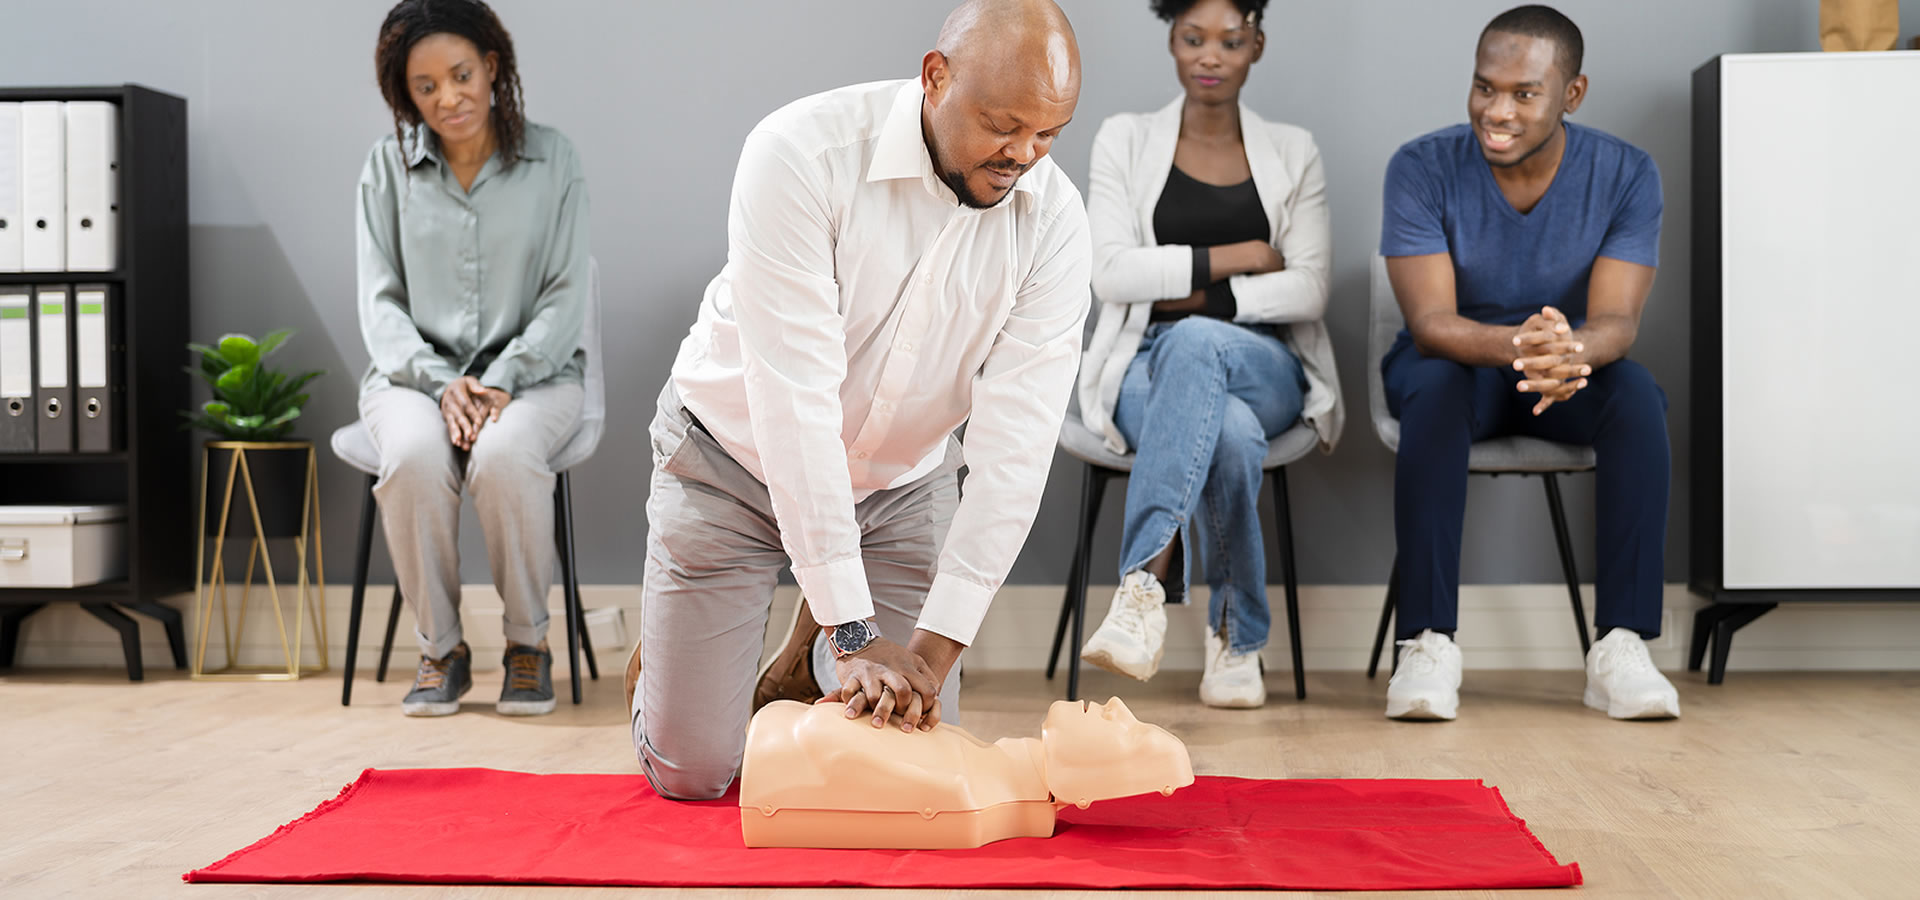 Importance of Taking BLS Training